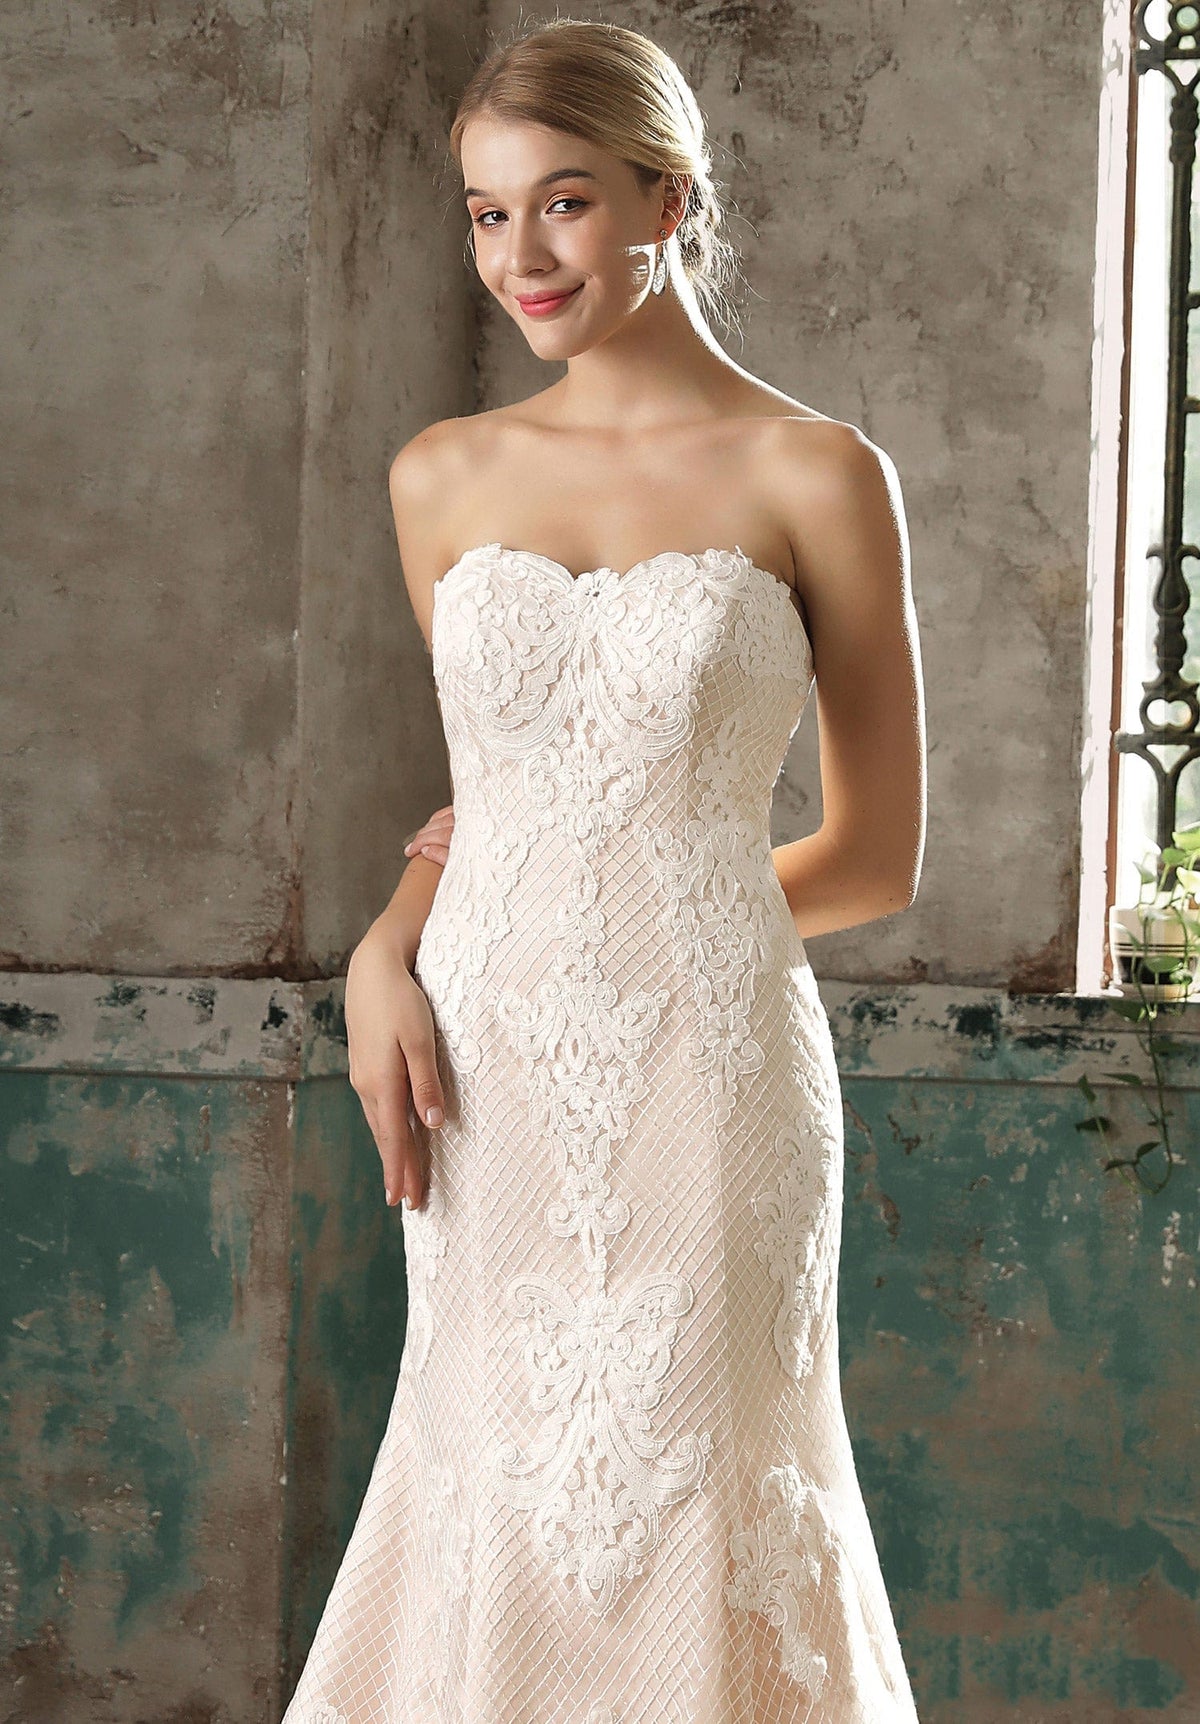 Modern Sweetheart Strapless Lace Appliques Wedding Dress